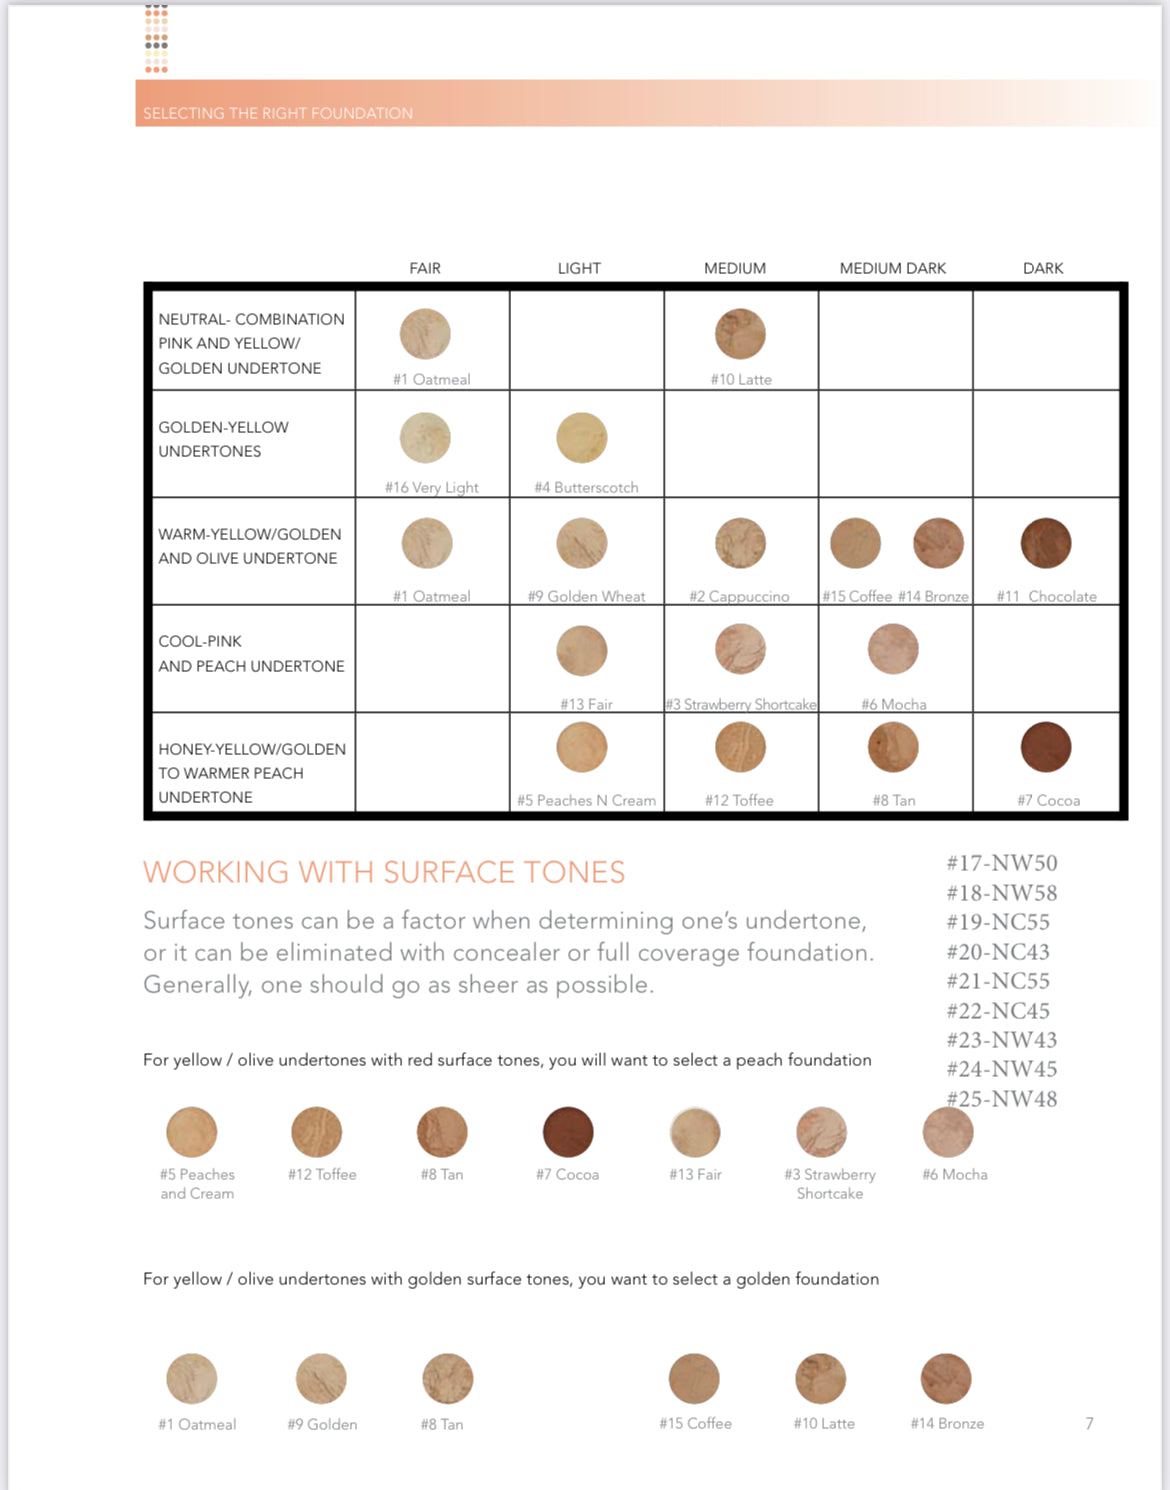 FREE 3 Sample Foundations, Pre-paid Full Size